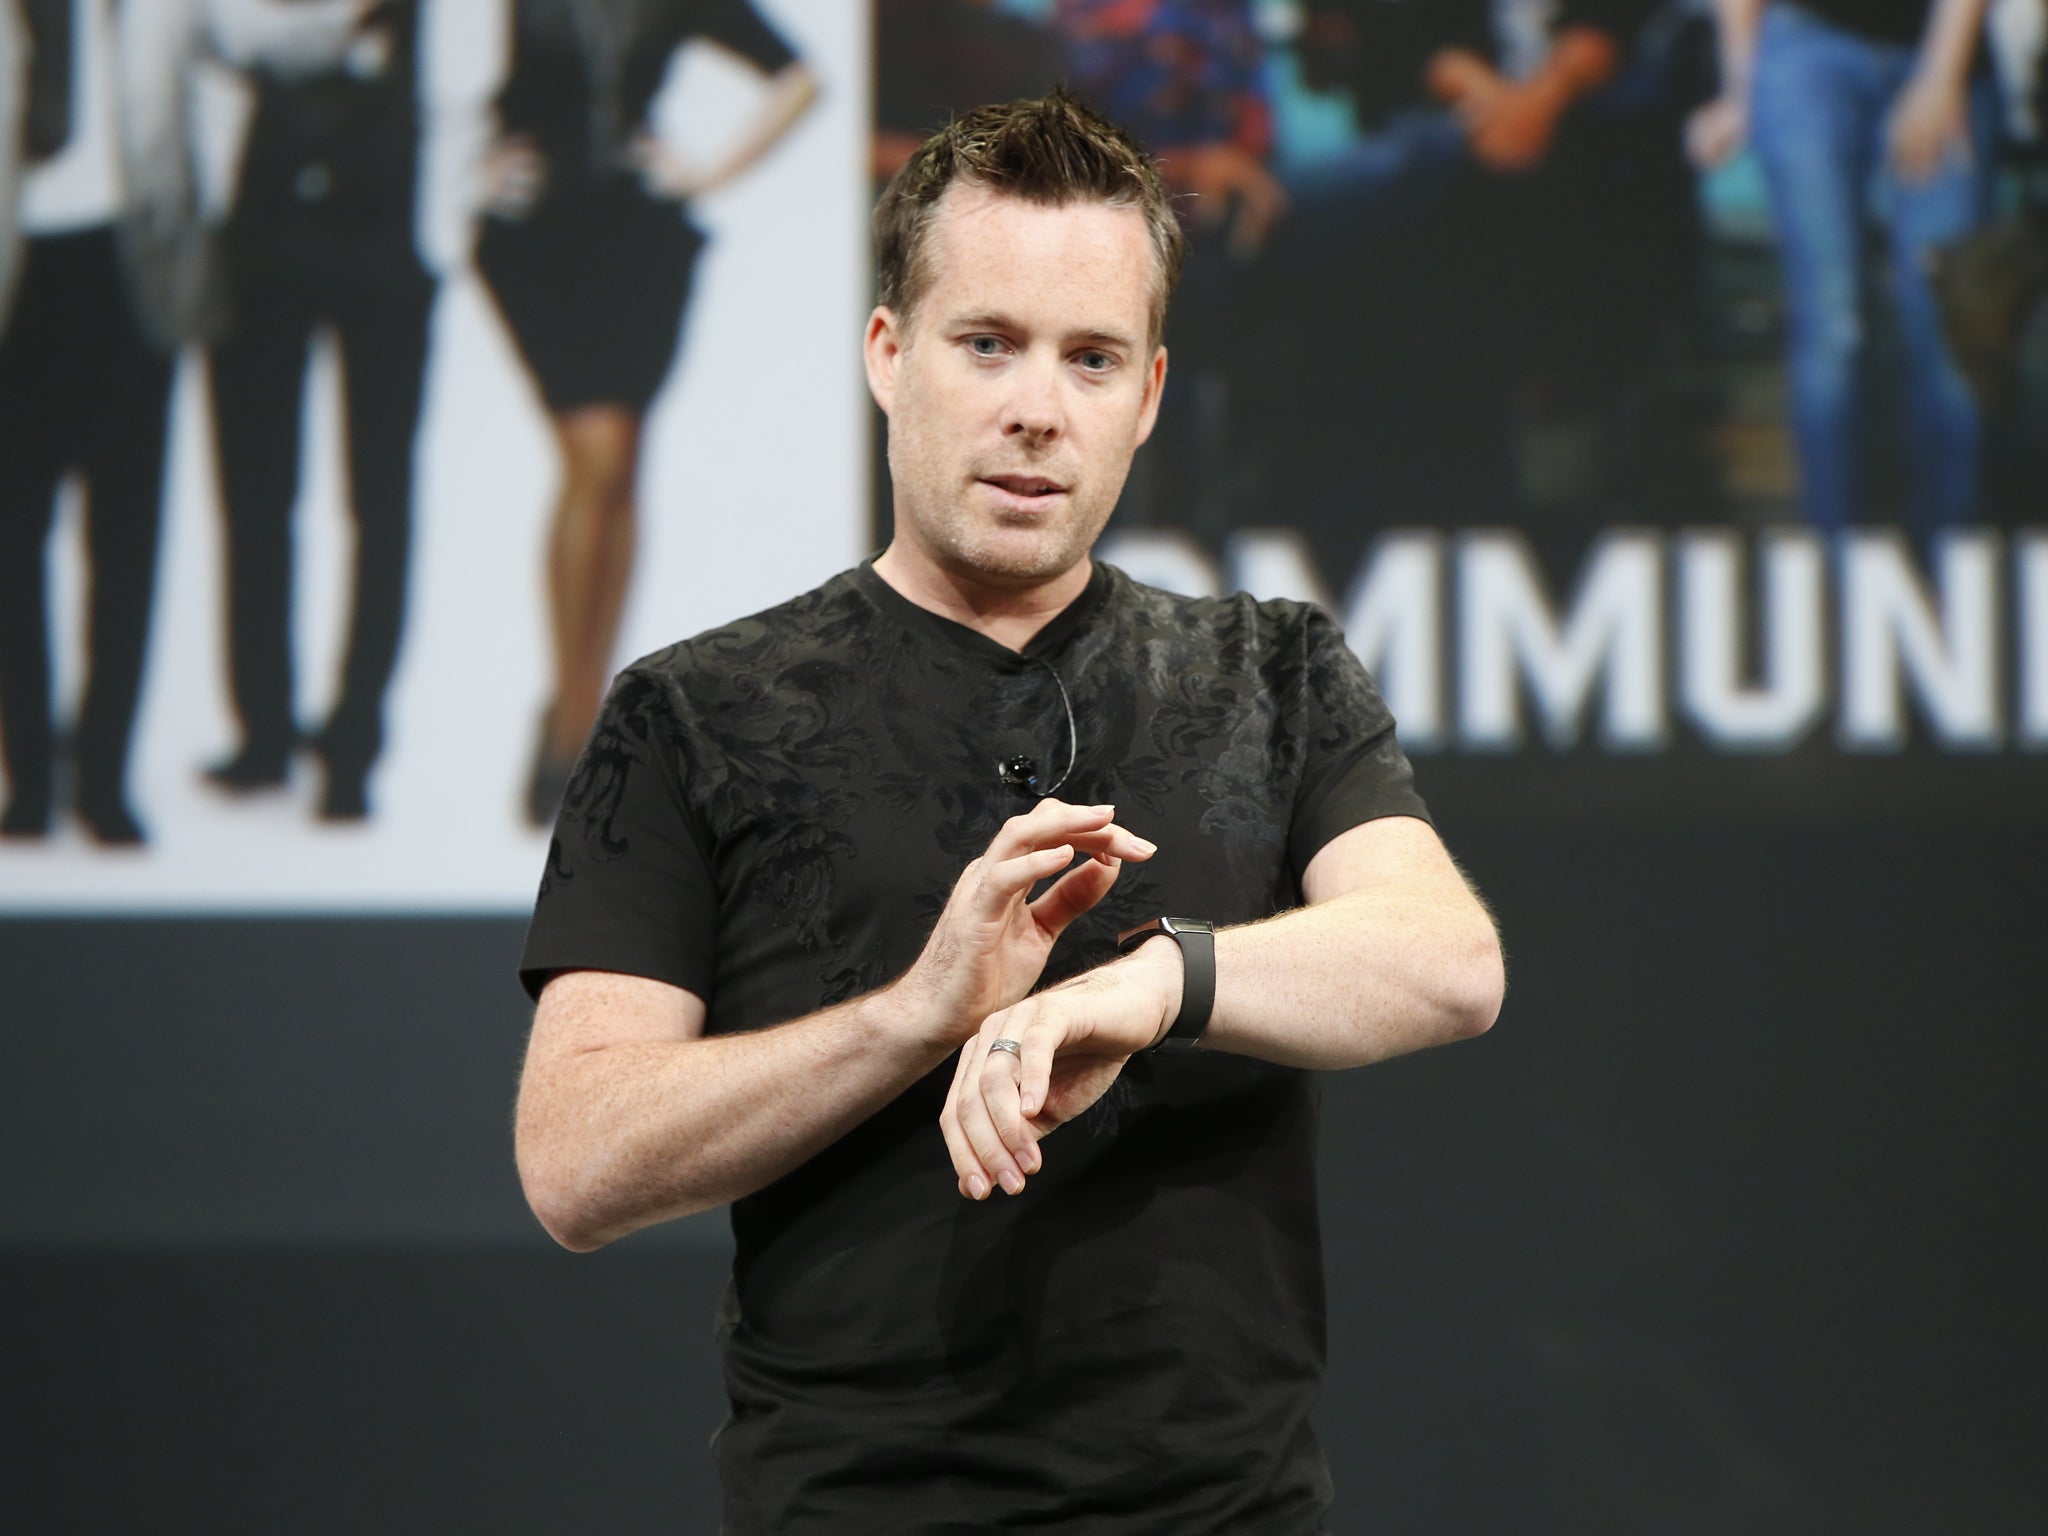 Dave Burke, Director of Engineering, Android at Google, uses an Android Wear watch during Google I/O Developers Conference at Moscone Center on June 25, 2014 in San Francisco, California